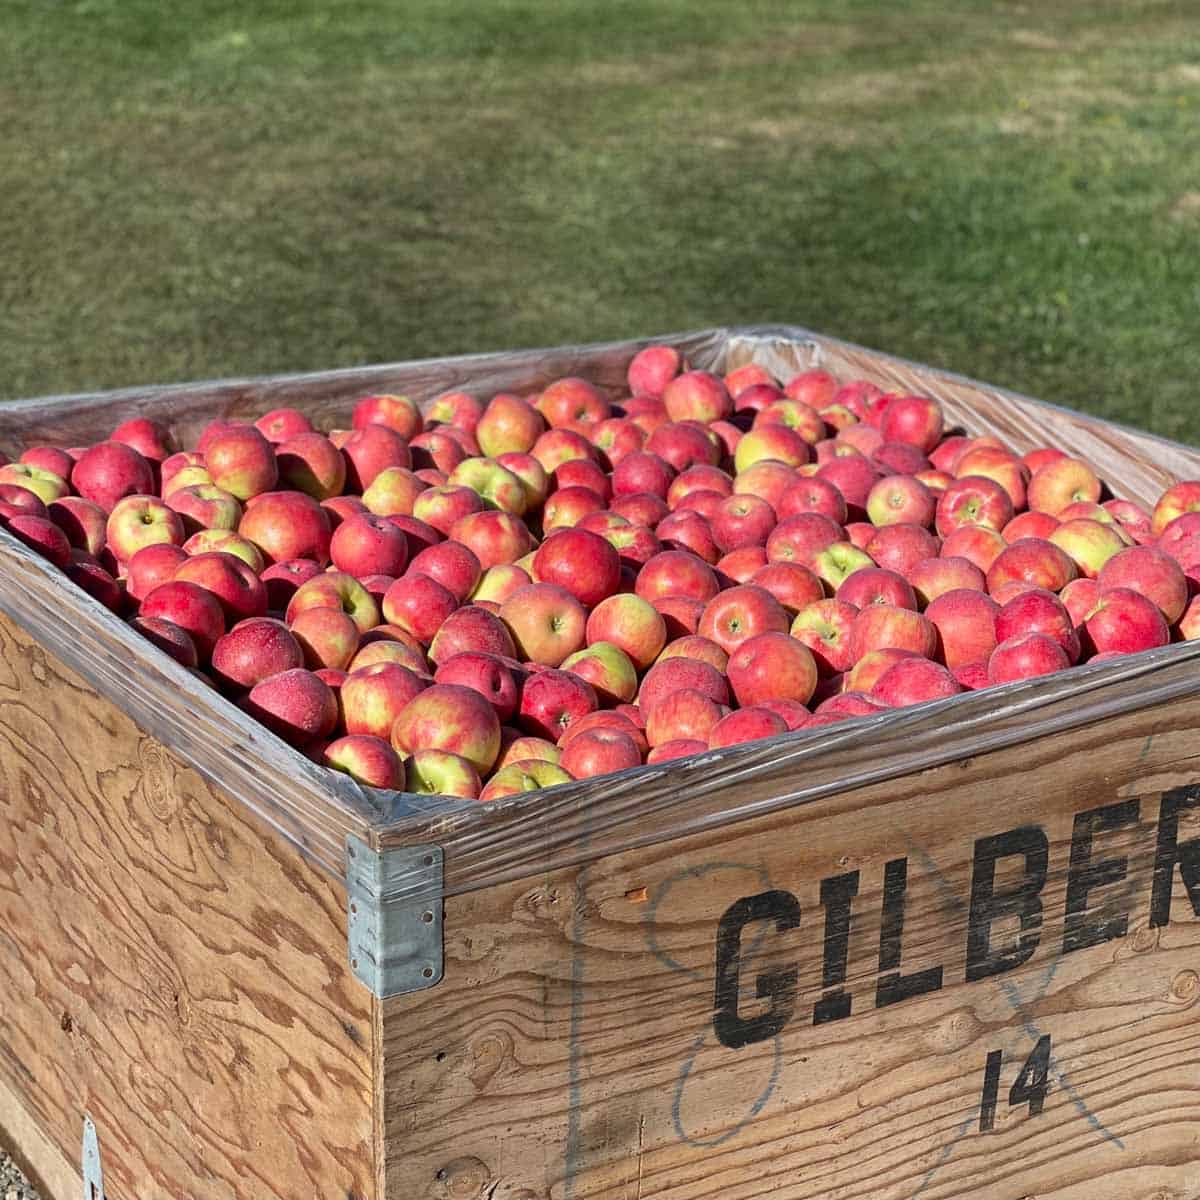 wooden crate of fresh apples in an apple orchard.